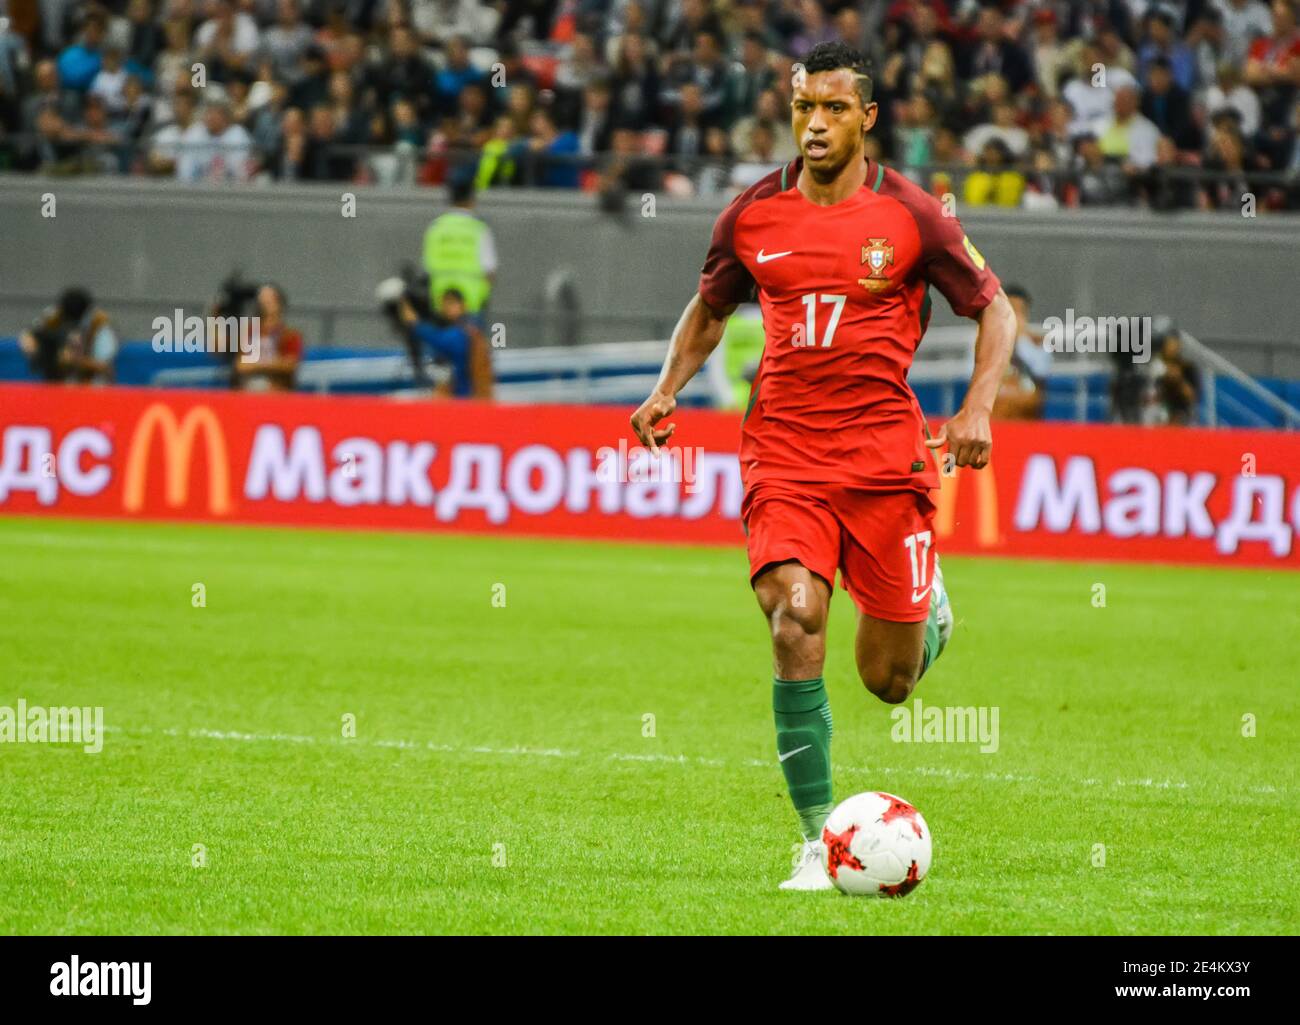 Kazan, Russia – June 28, 2017. Portugal national football team winger Nani in action during FIFA Confederations Cup 2017 semi-final Portugal vs Chile. Stock Photo